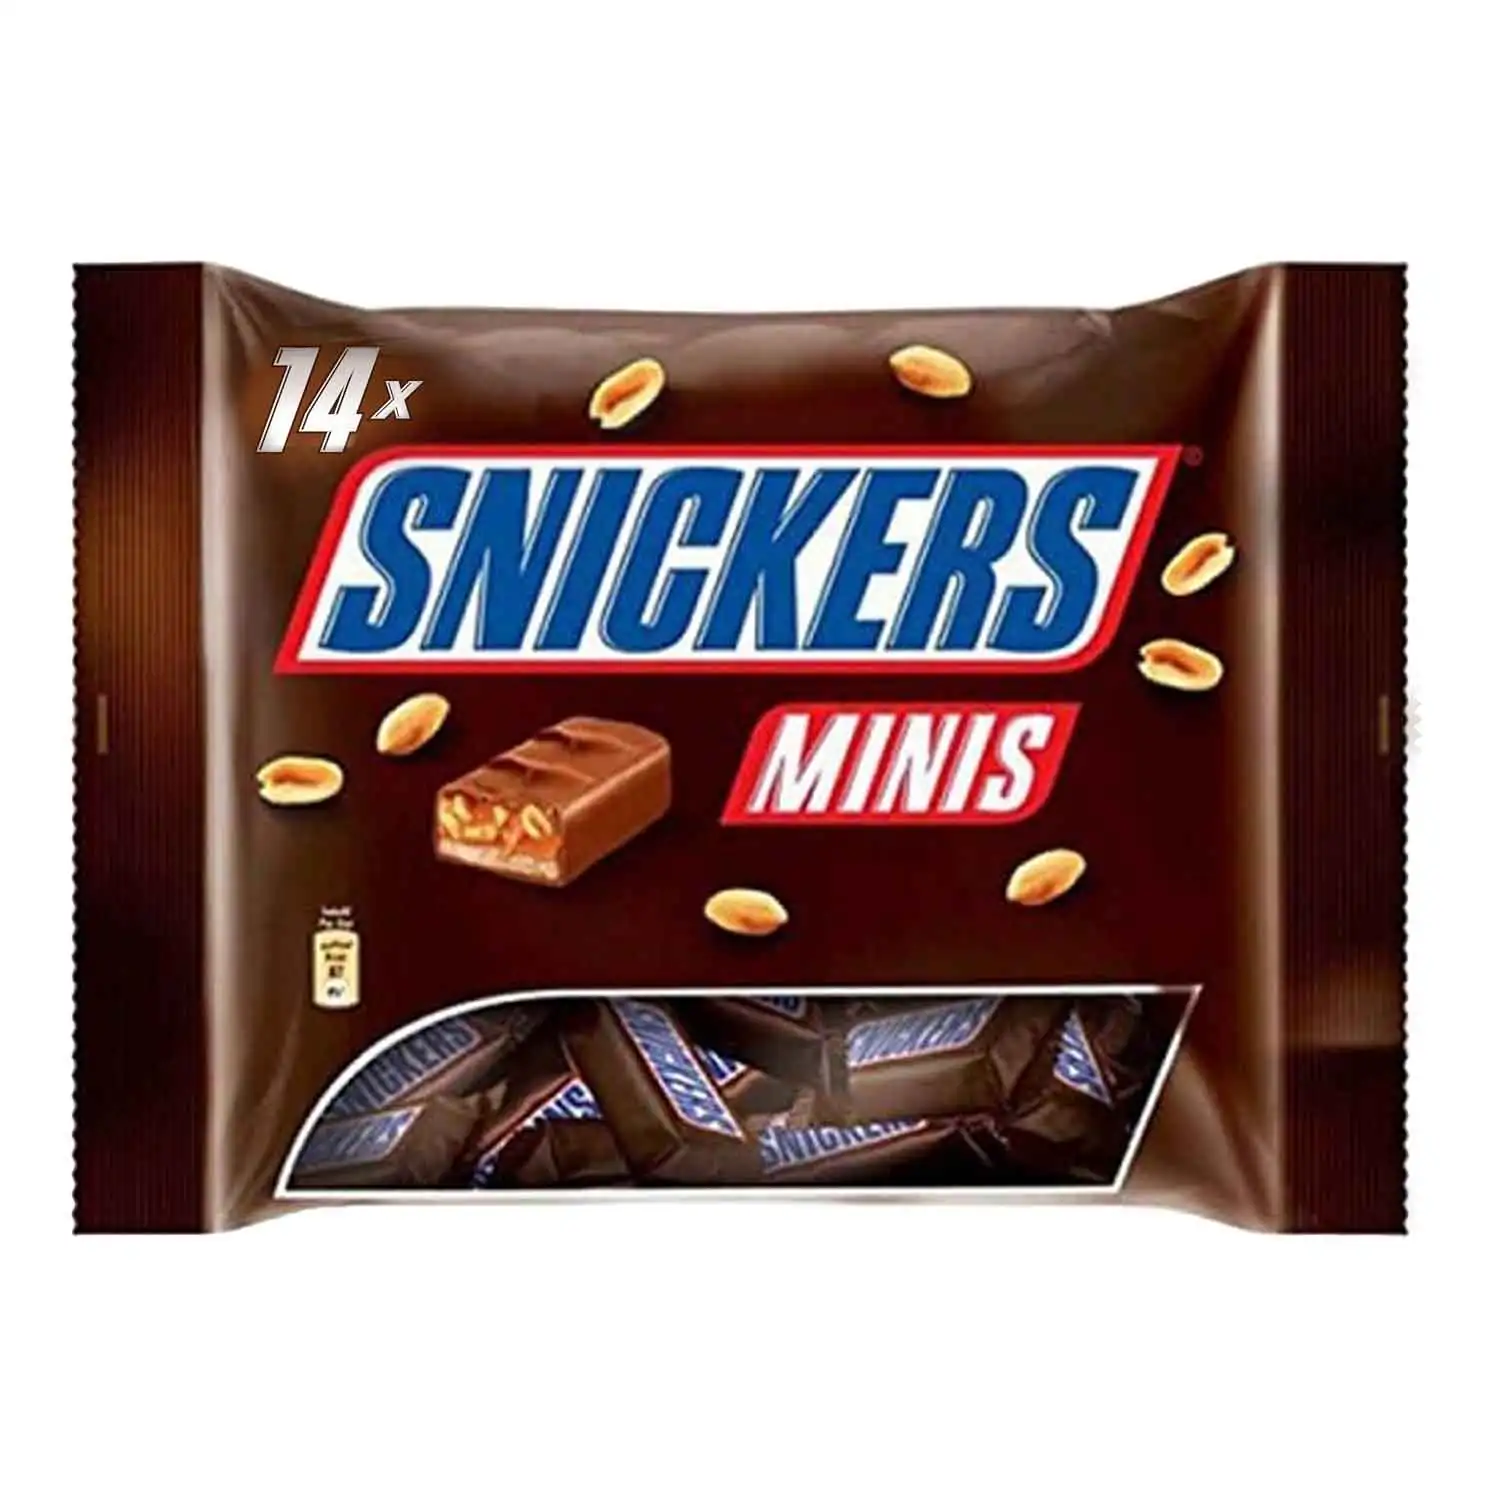 Snickers minis 275g